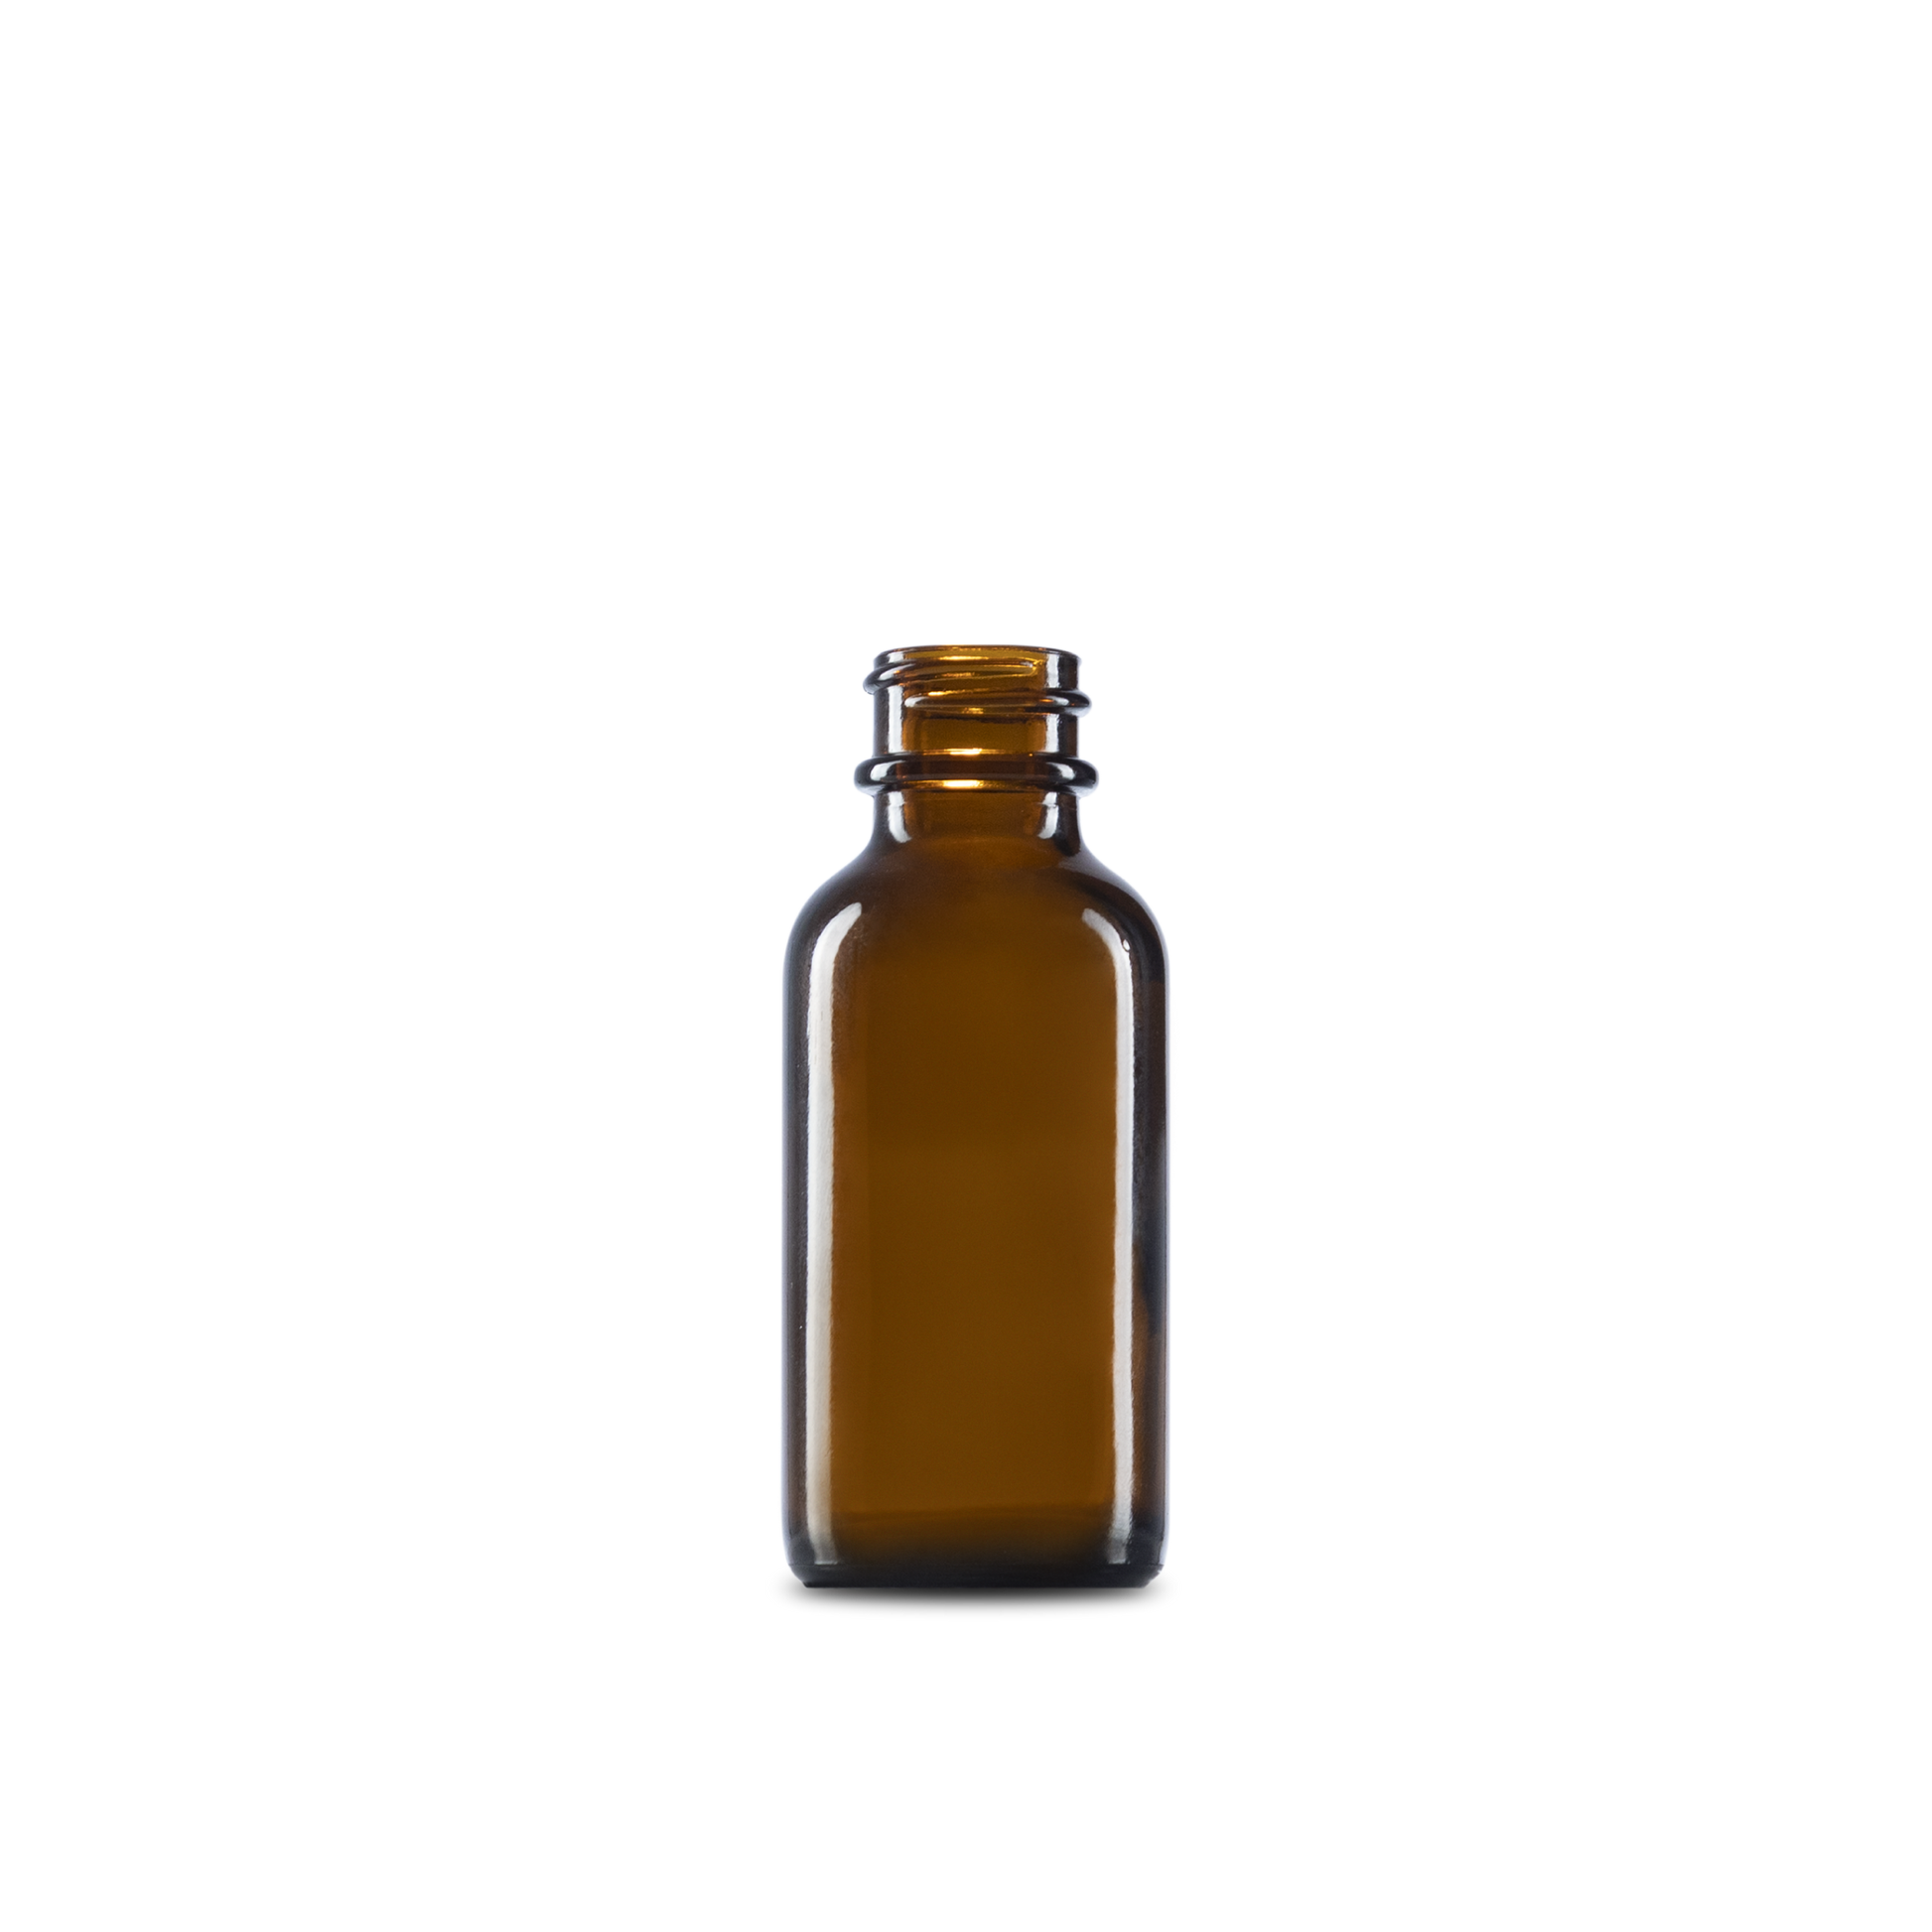 1 oz amber glass bottles are an excellent choice for a variety of products. this bottle is great because it is reusable and biodegradable.